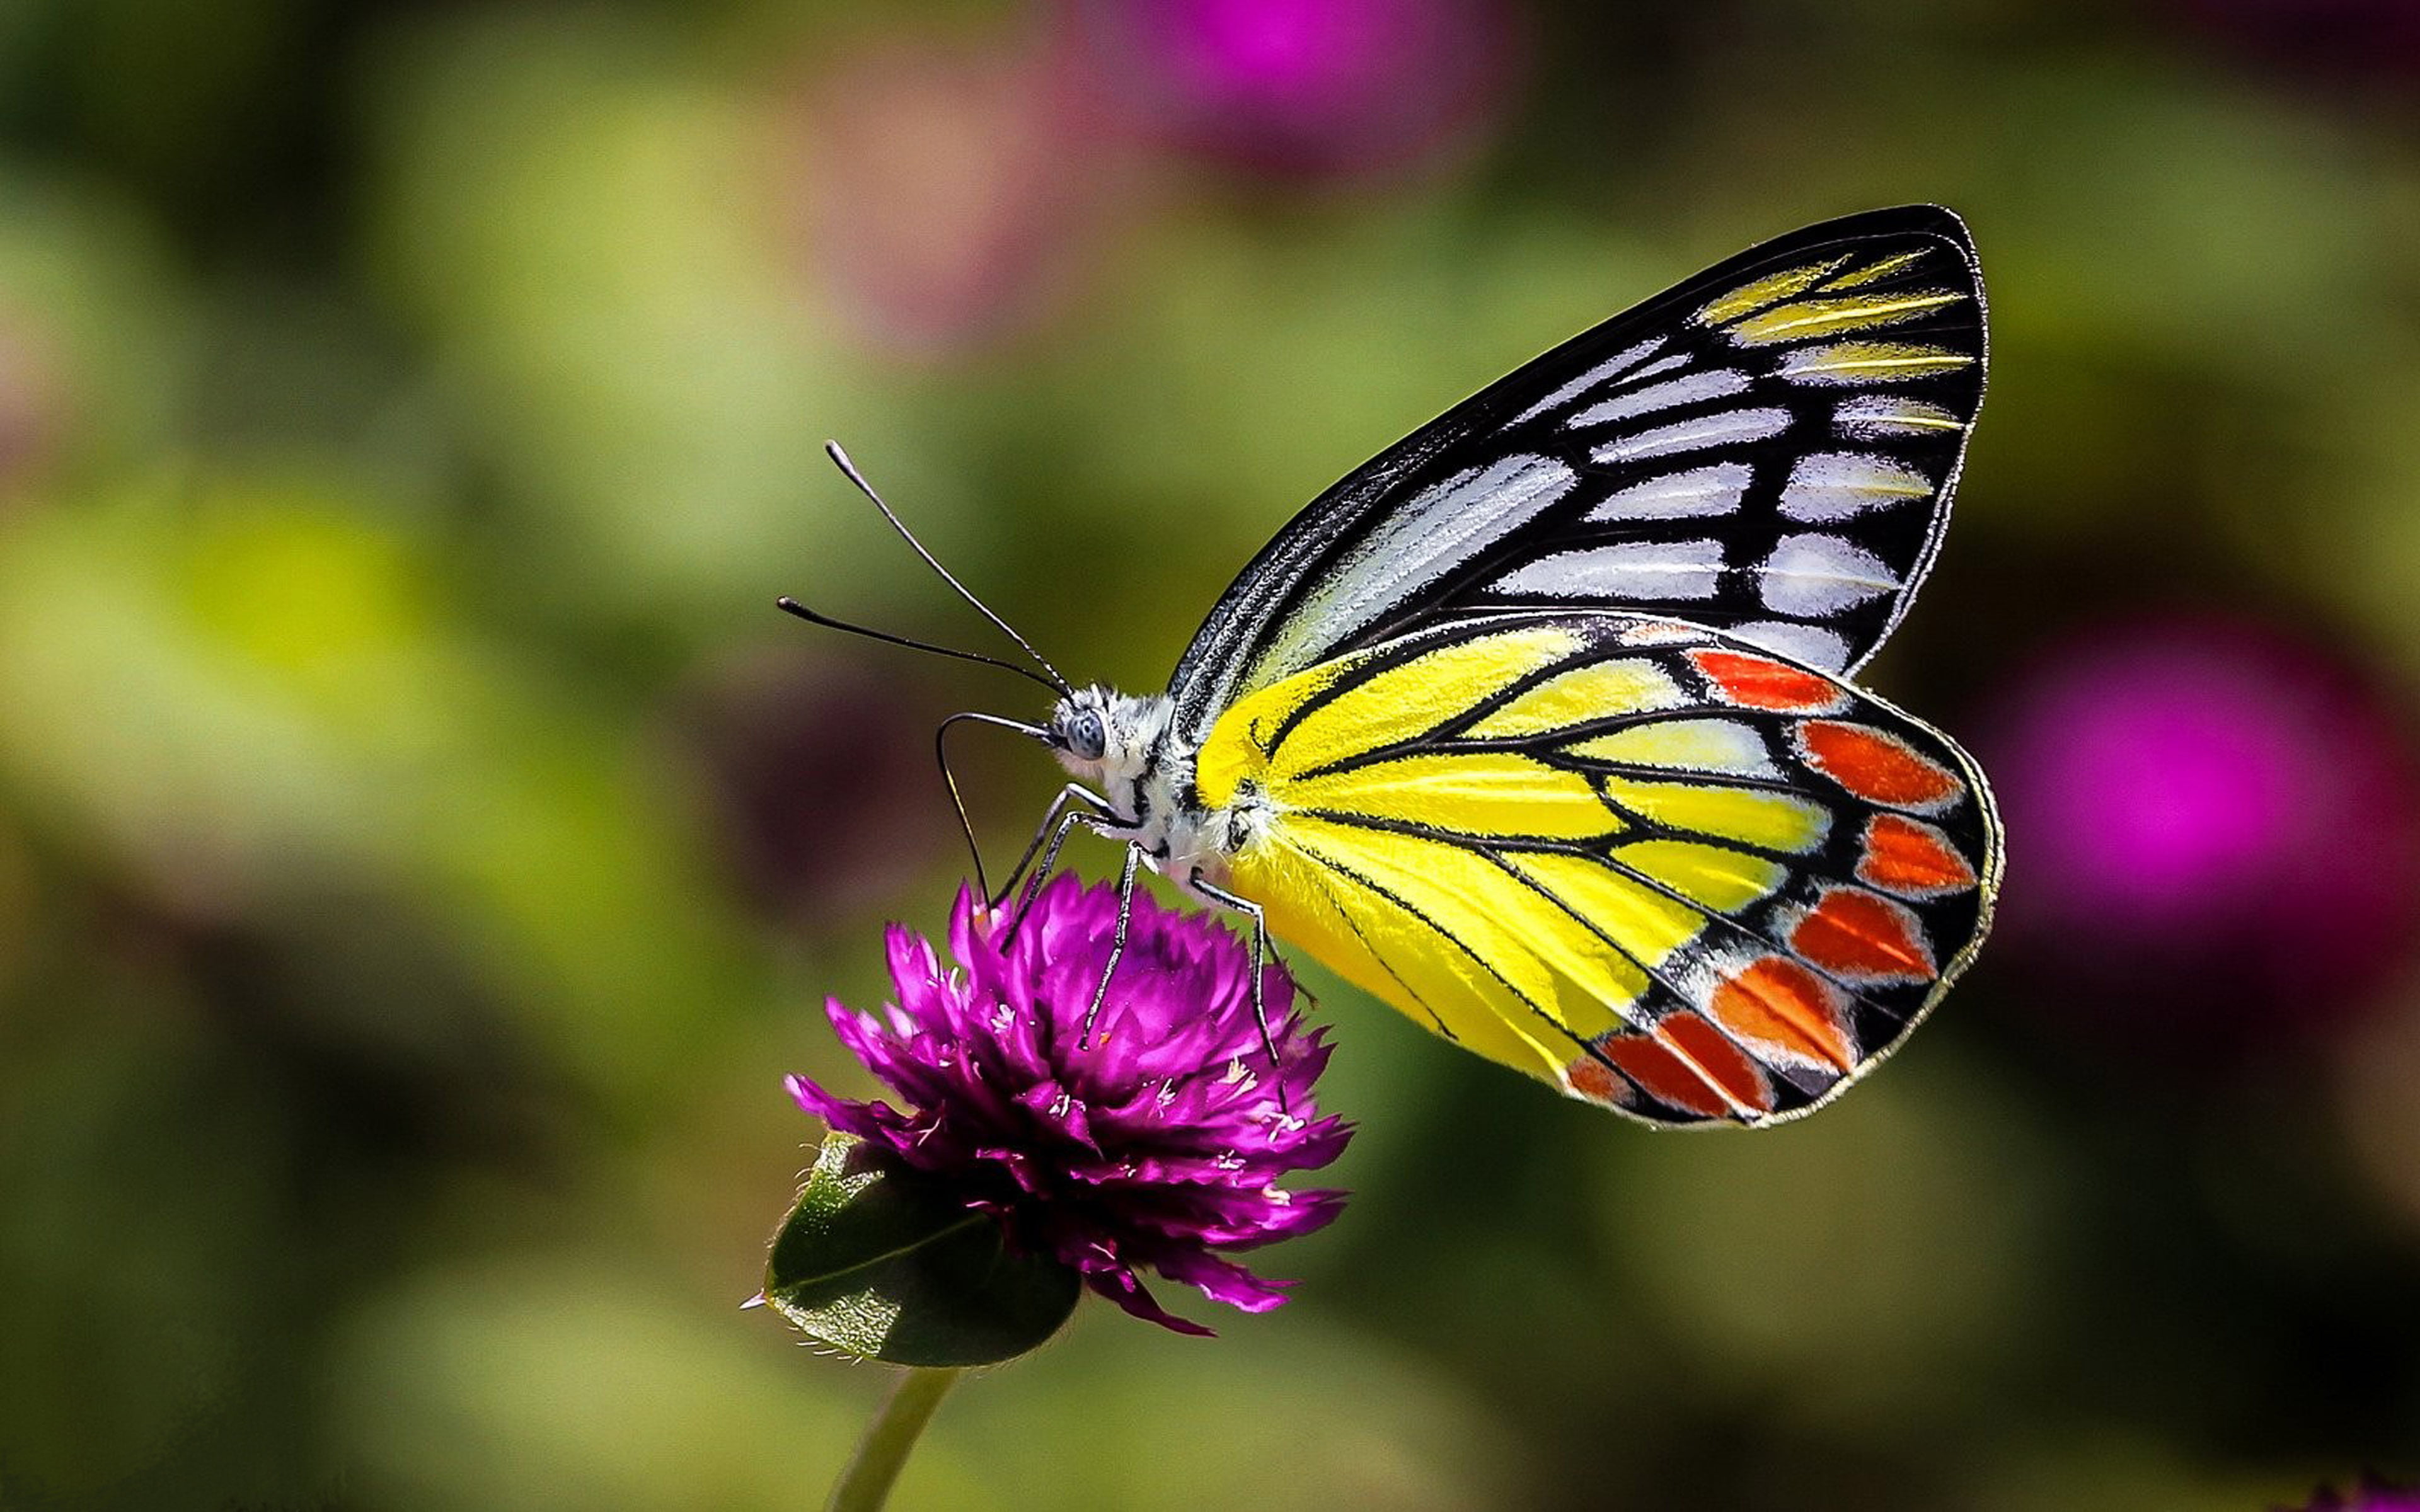 Insects Butterfly On Flower Macro Picture Ultra Hd Wallpapers For Desktop Mobile Phones And Laptop 3840×2400